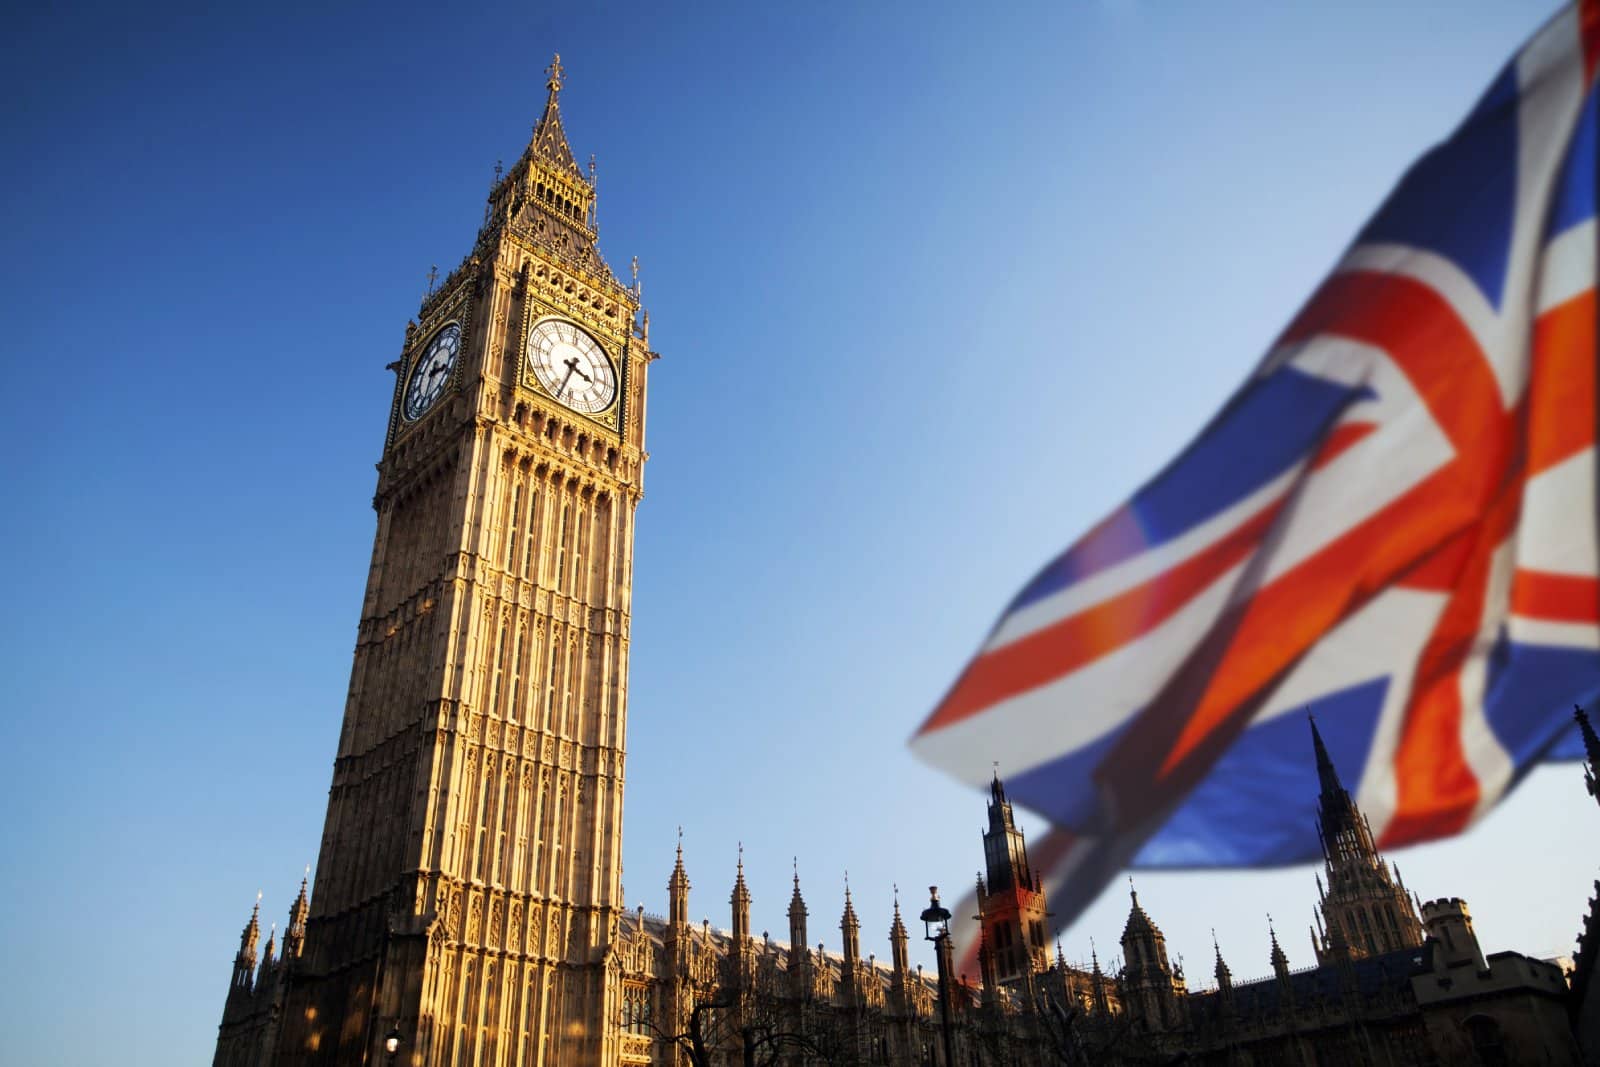 Image Credit: Shutterstock / Melinda Nagy <p><span>Reform UK calls for changes in local government, including directly elected executive mayors and more referendums to increase democratic engagement.</span></p>